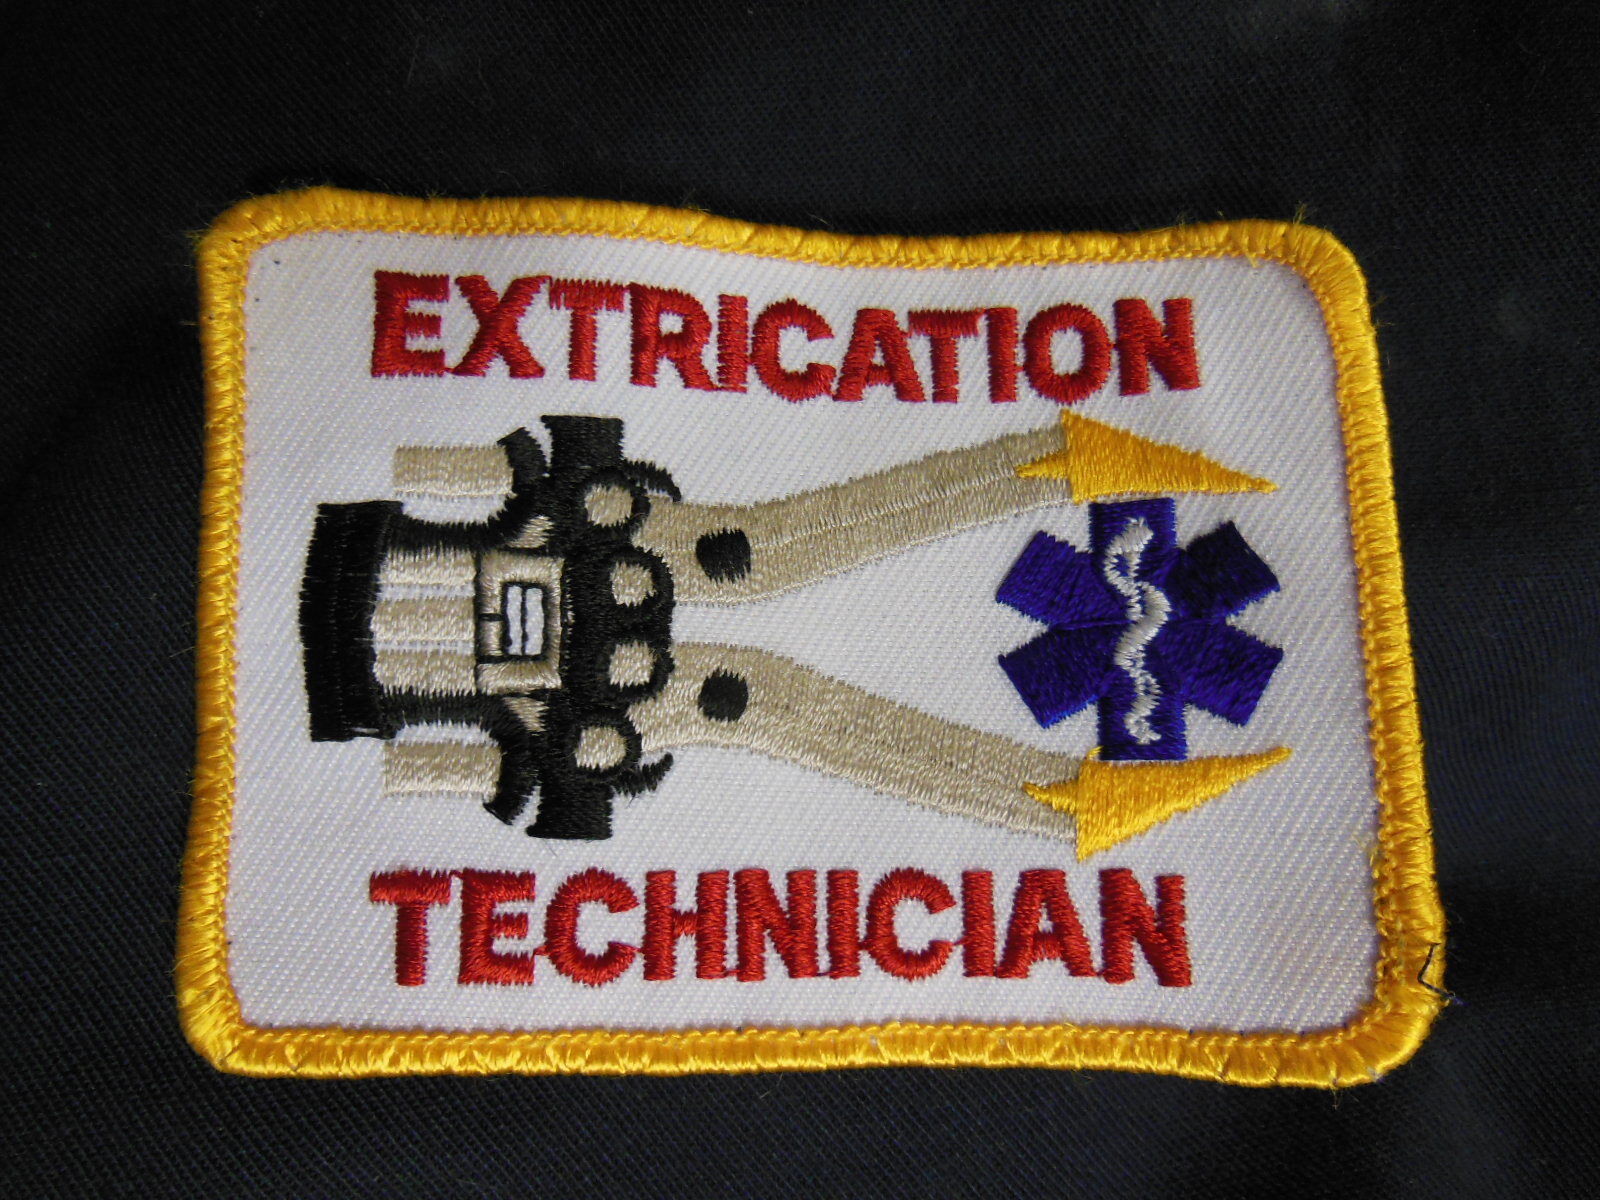 EXTRICATION TECHNICIAN Jaws of Life PATCH - Accident Emergency Rescue Medic Help